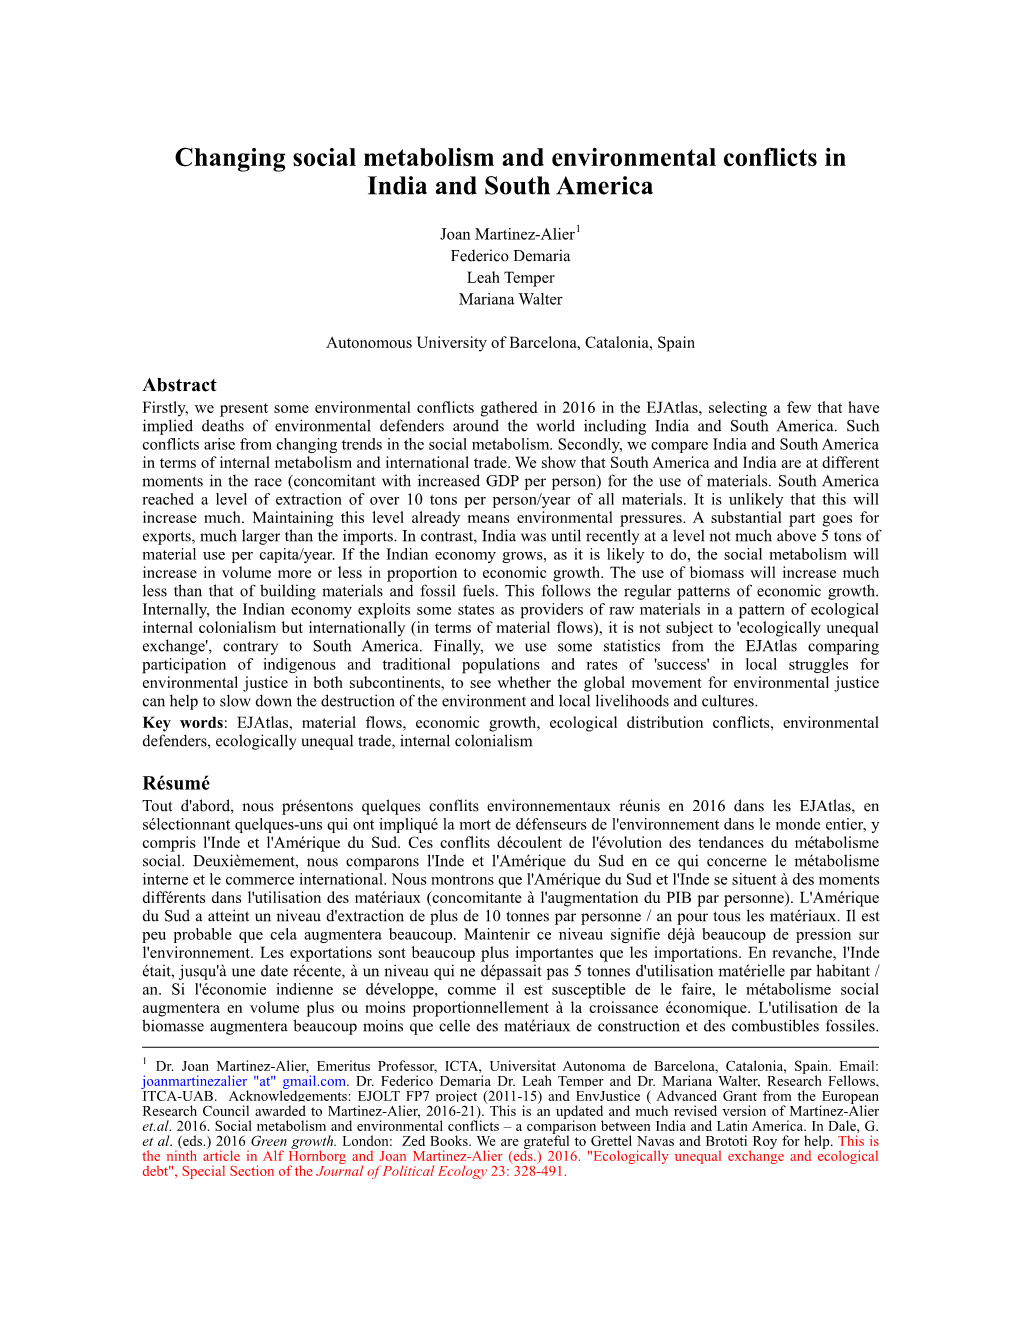 Changing Social Metabolism and Environmental Conflicts in India and South America